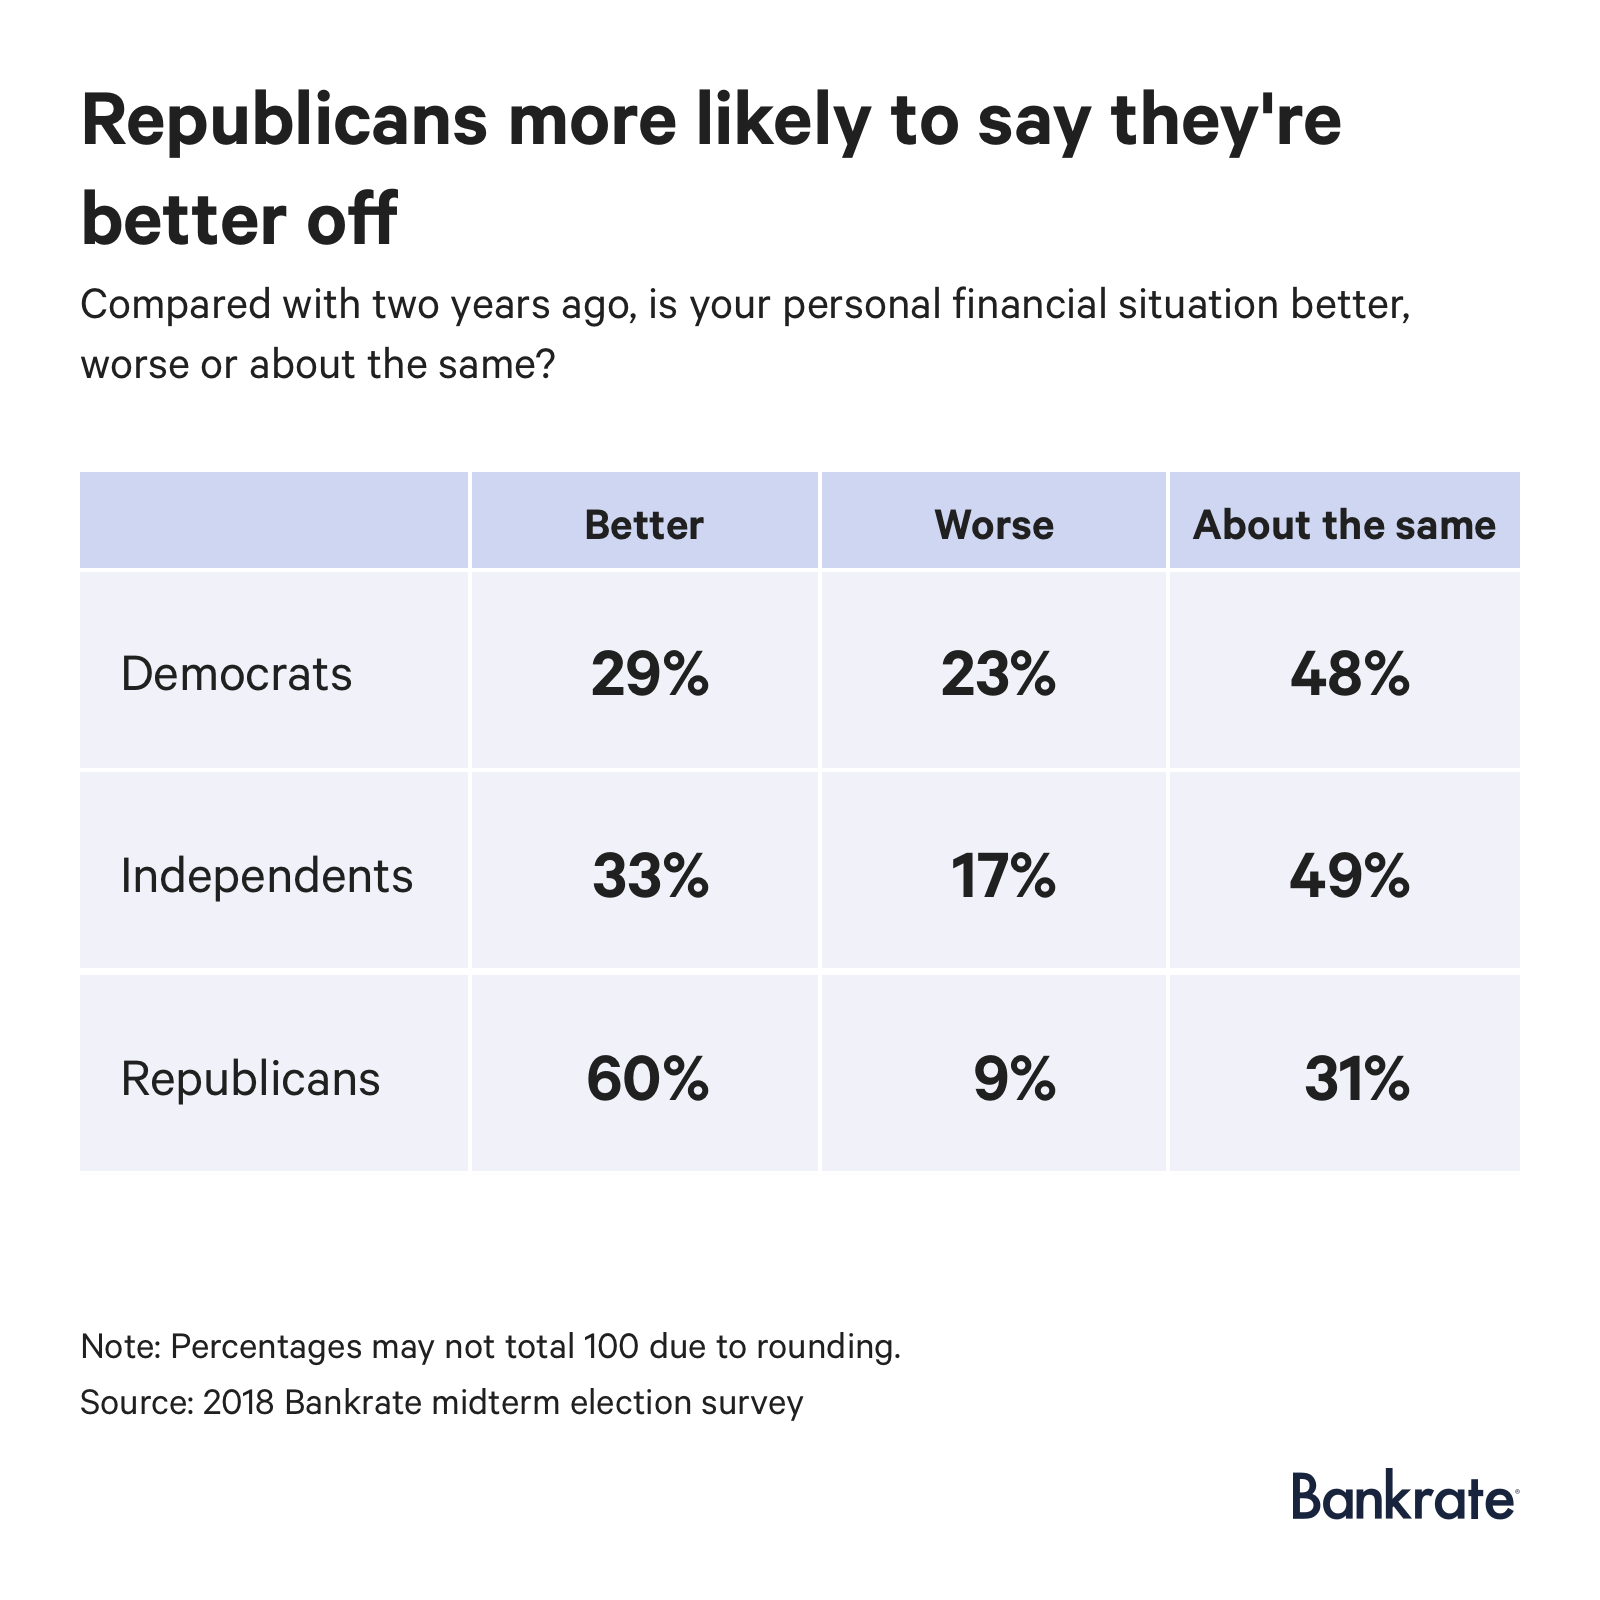 60% of Republicans think their personal financial situation is better compared with two years ago